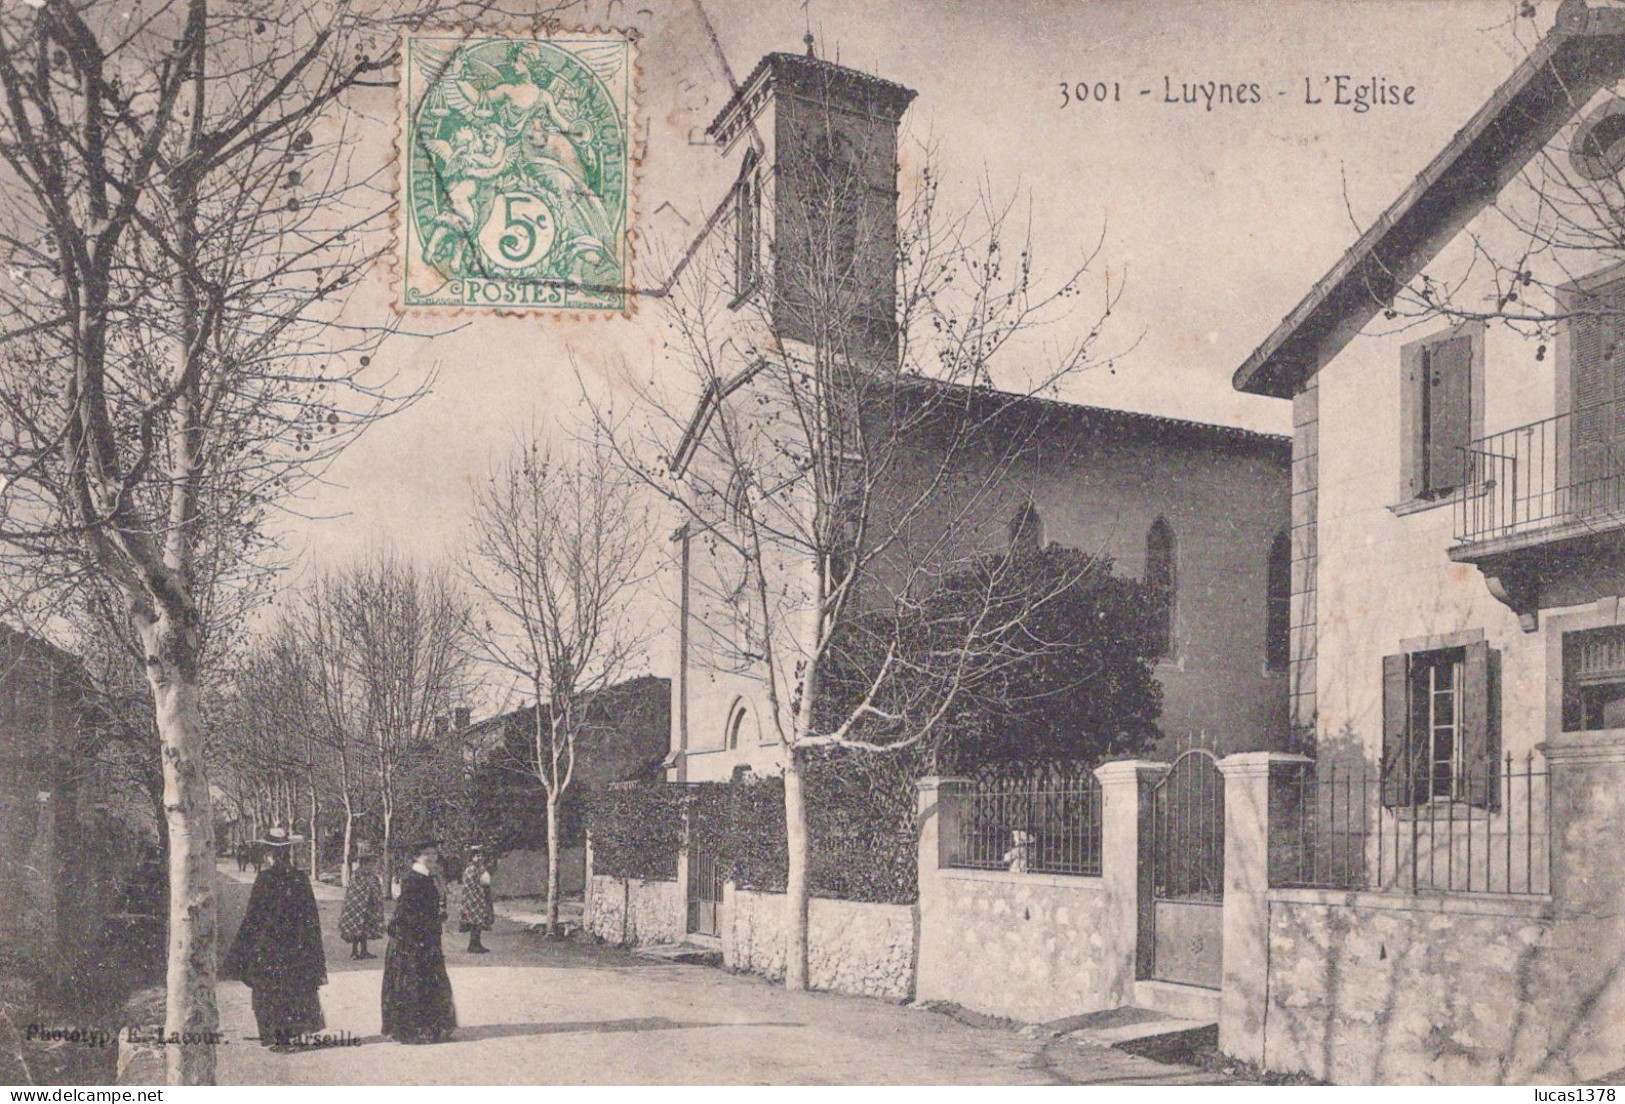 13 / LUYNES / L EGLISE / LACOUR 3001 - Luynes